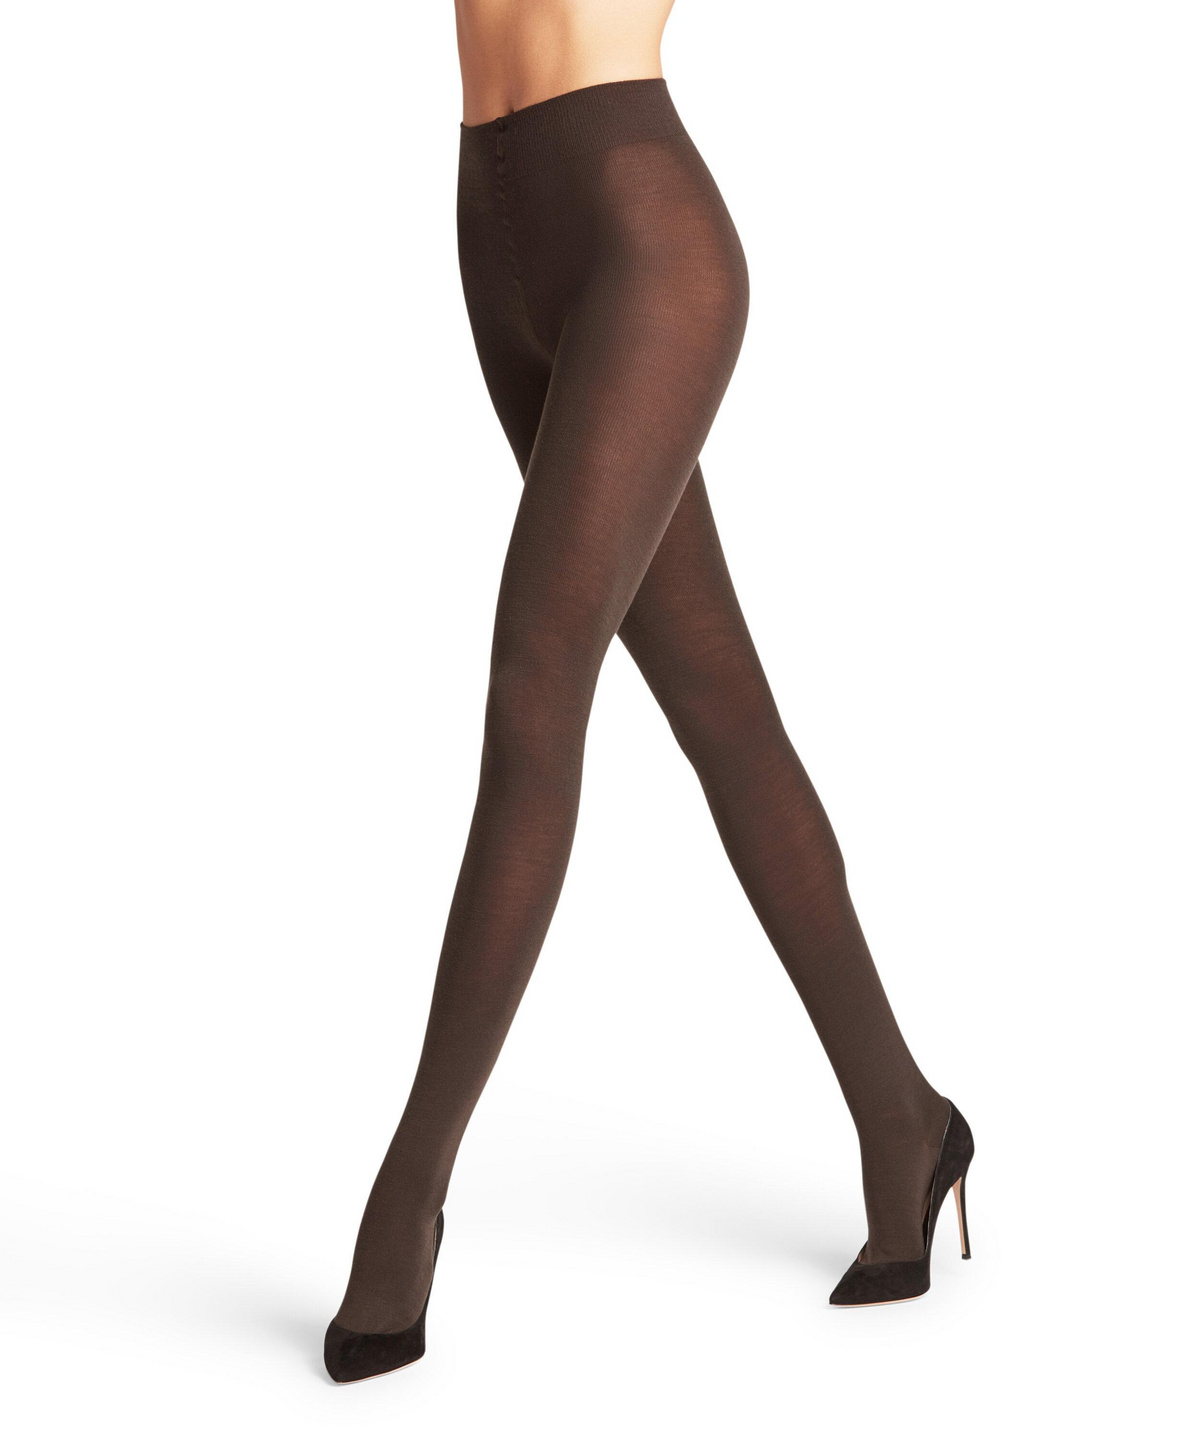 Buy Dark Brown Knitted Winter Tights Online - Shop for W